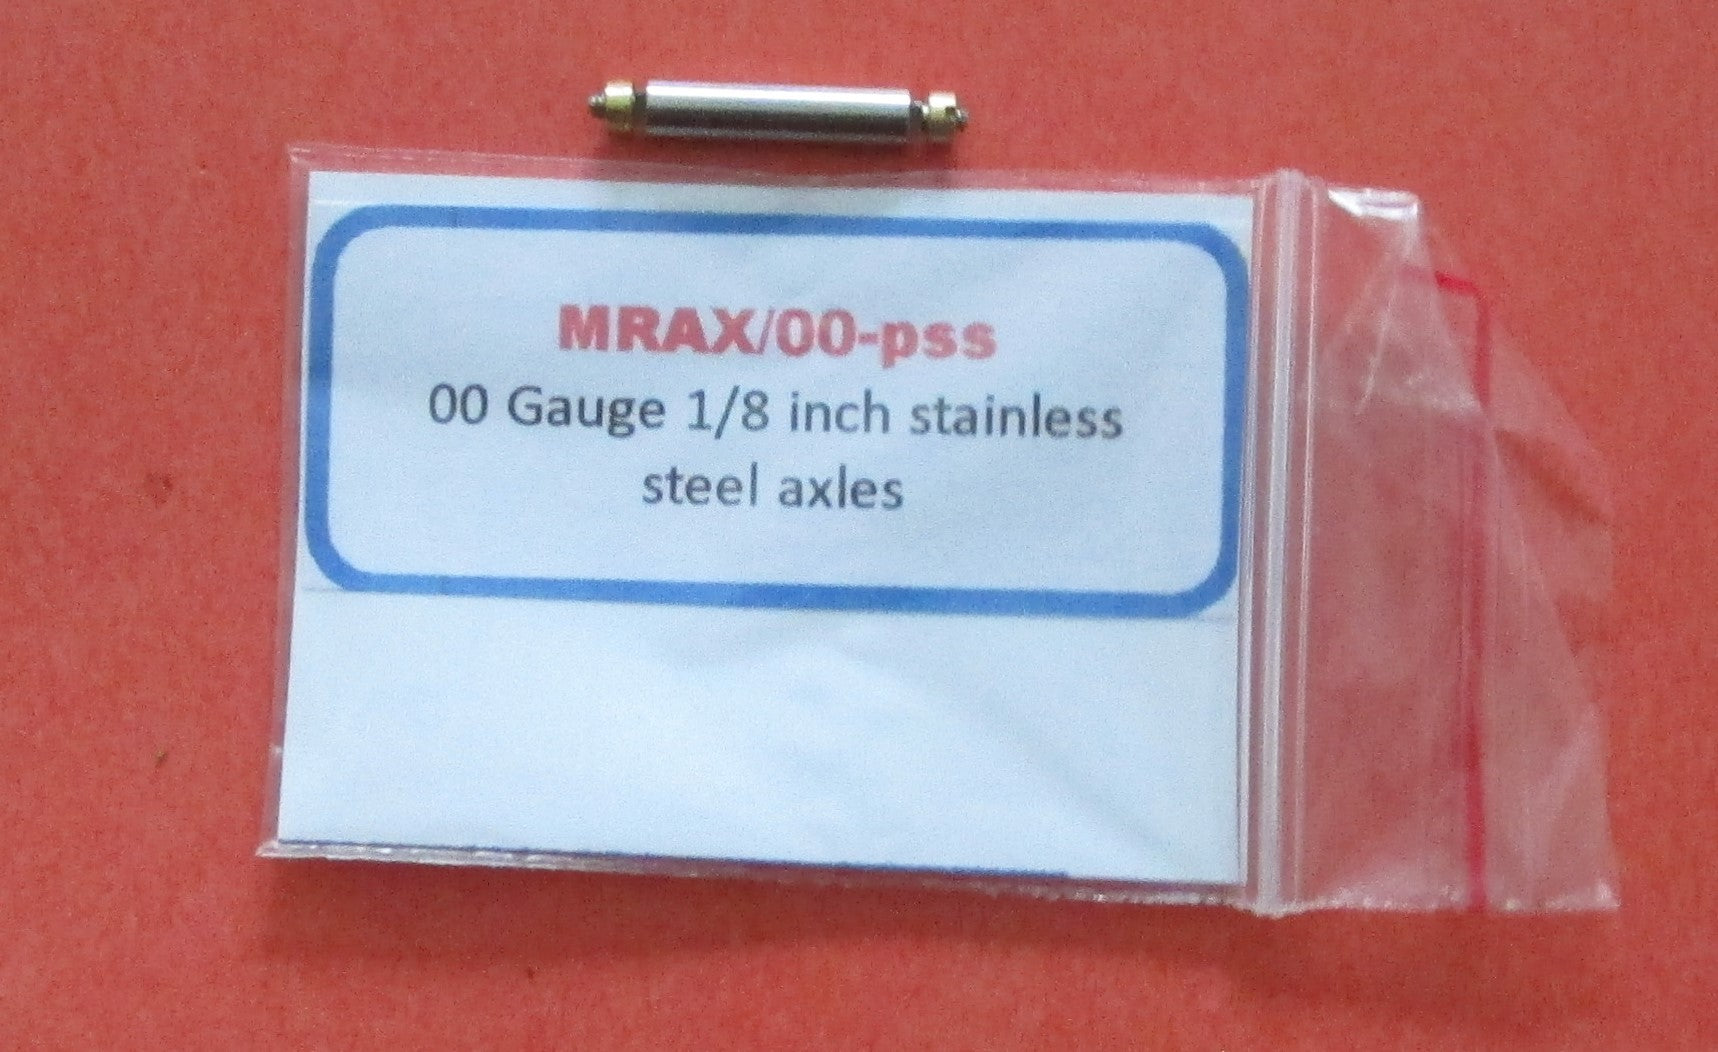 MRAX/00-pss MARKITS  Driving Axle OO 1/8in Including Nuts Stainless Steel